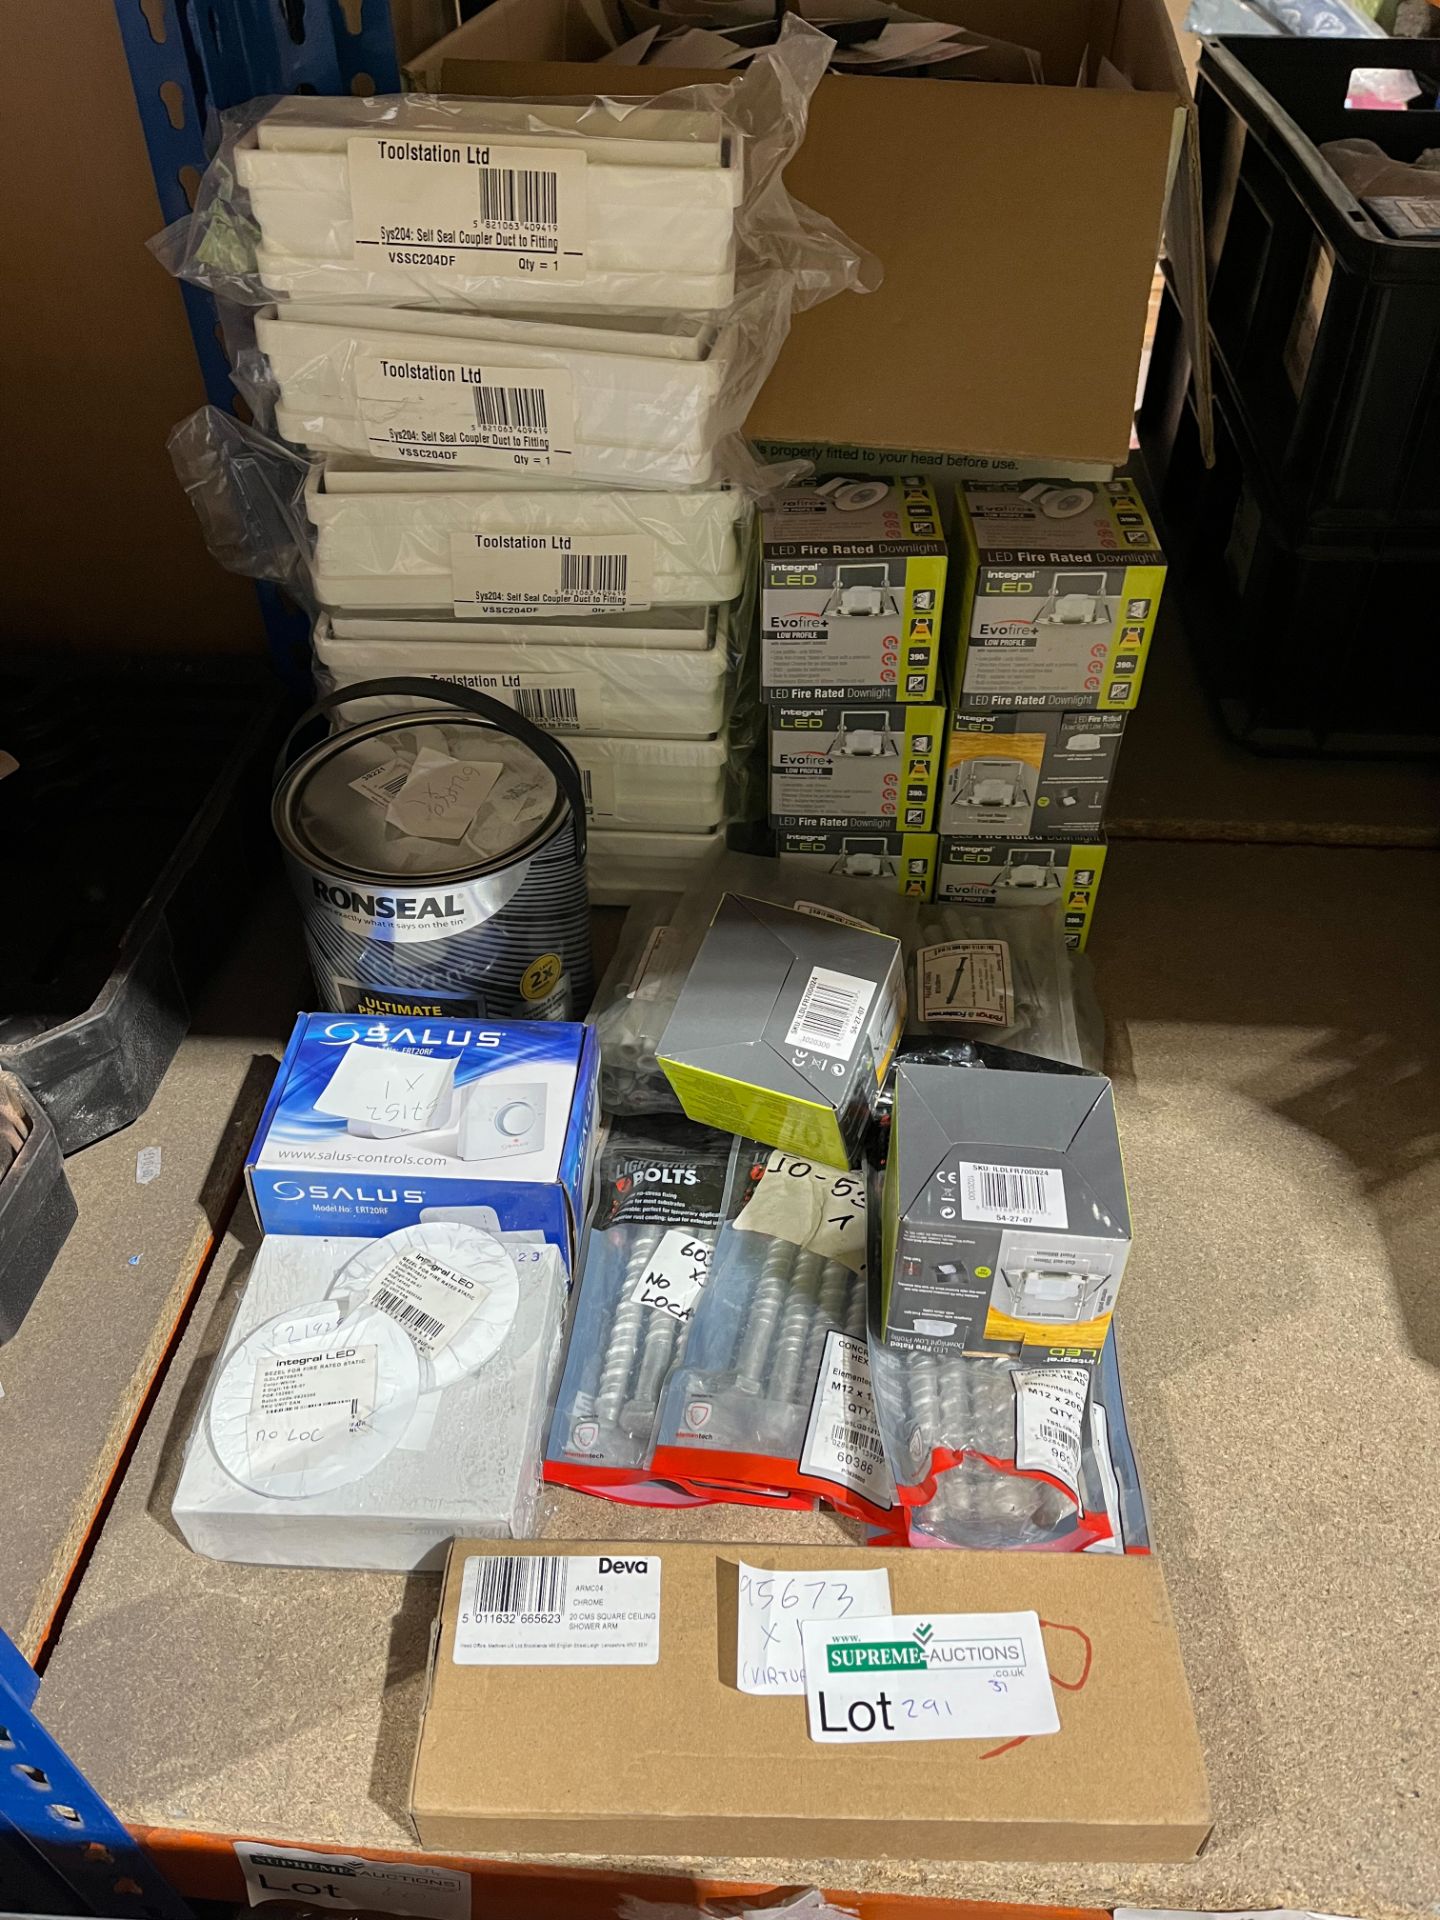 30 PIECE MIXED LOT INCLUDING RONSEAL, DALUS, BOLTS, LIGHTS ETC P3